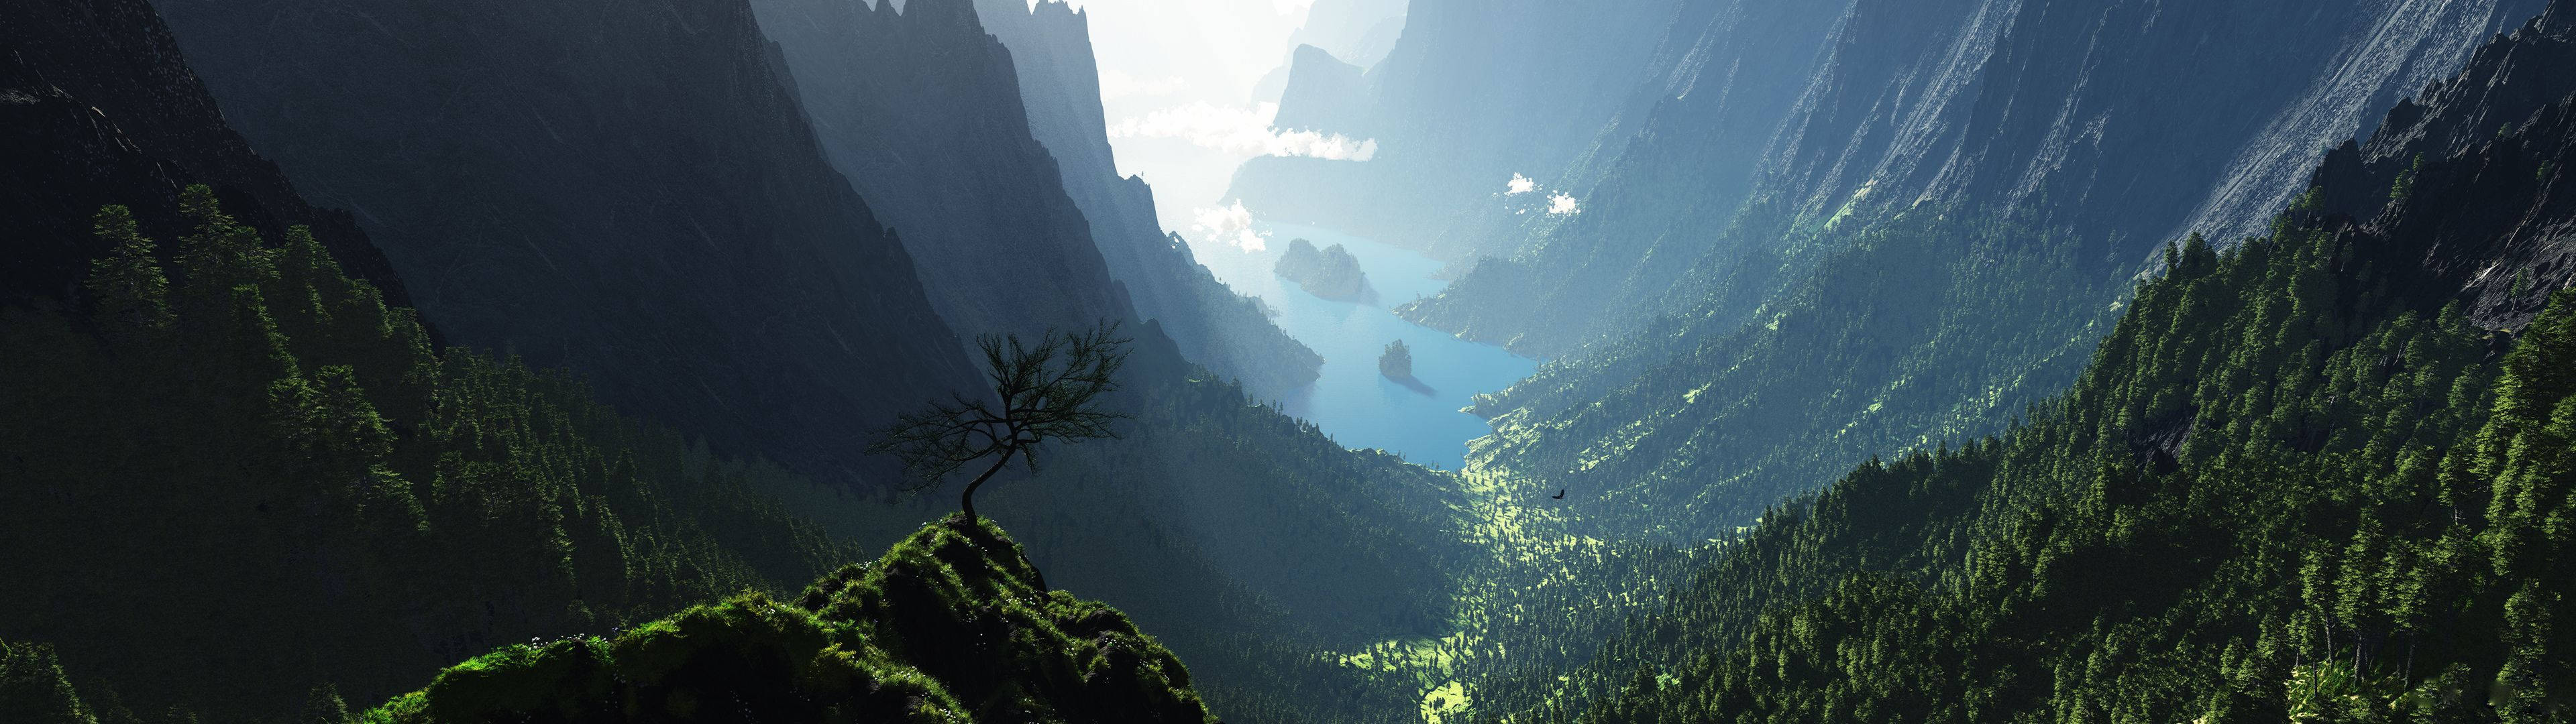 A Beautiful Mountain Valley View From Two Screens Wallpaper